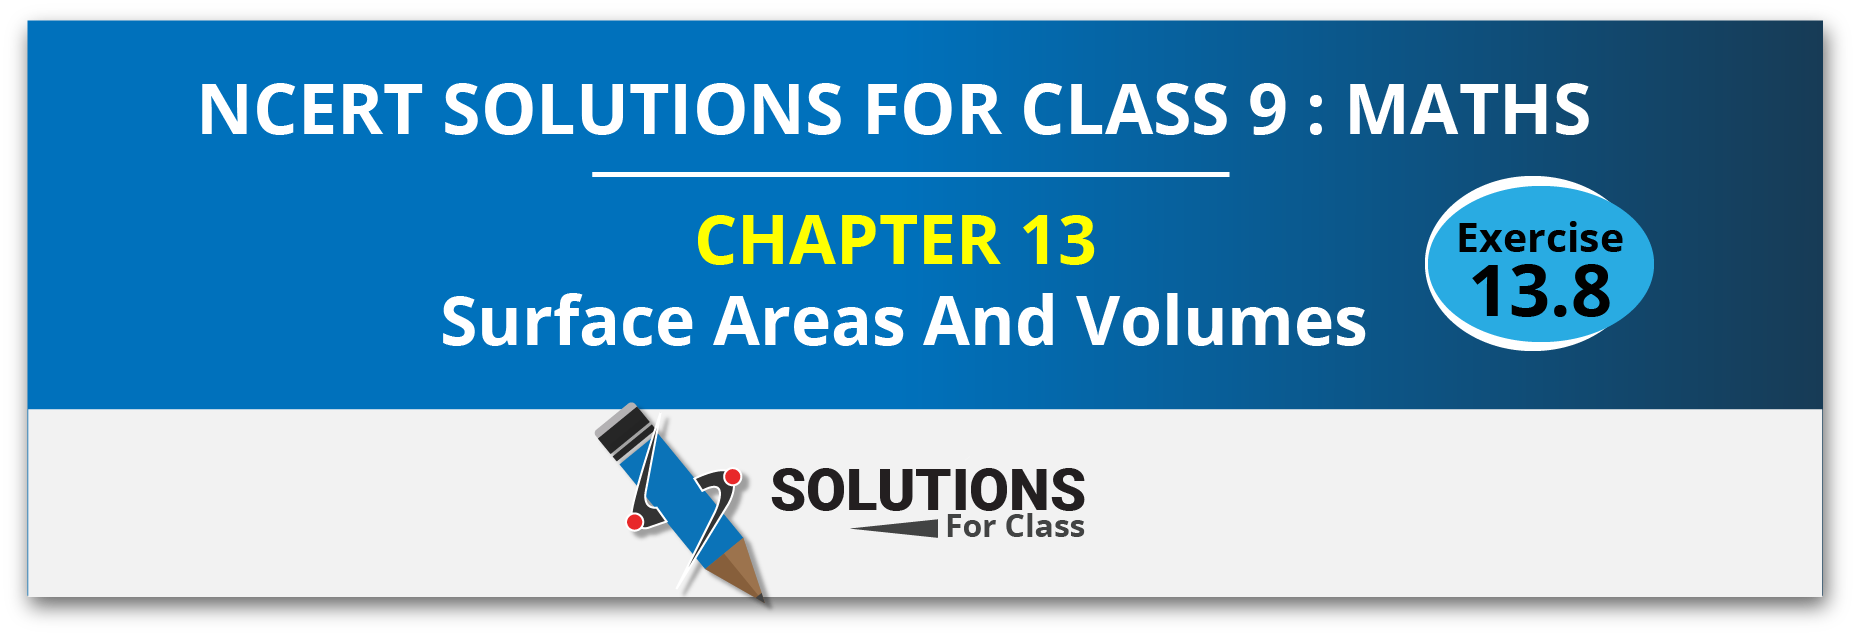 NCERT Solutions for Class 9 Maths Chapter 13 Surface Areas and Volumes Ex 13.8